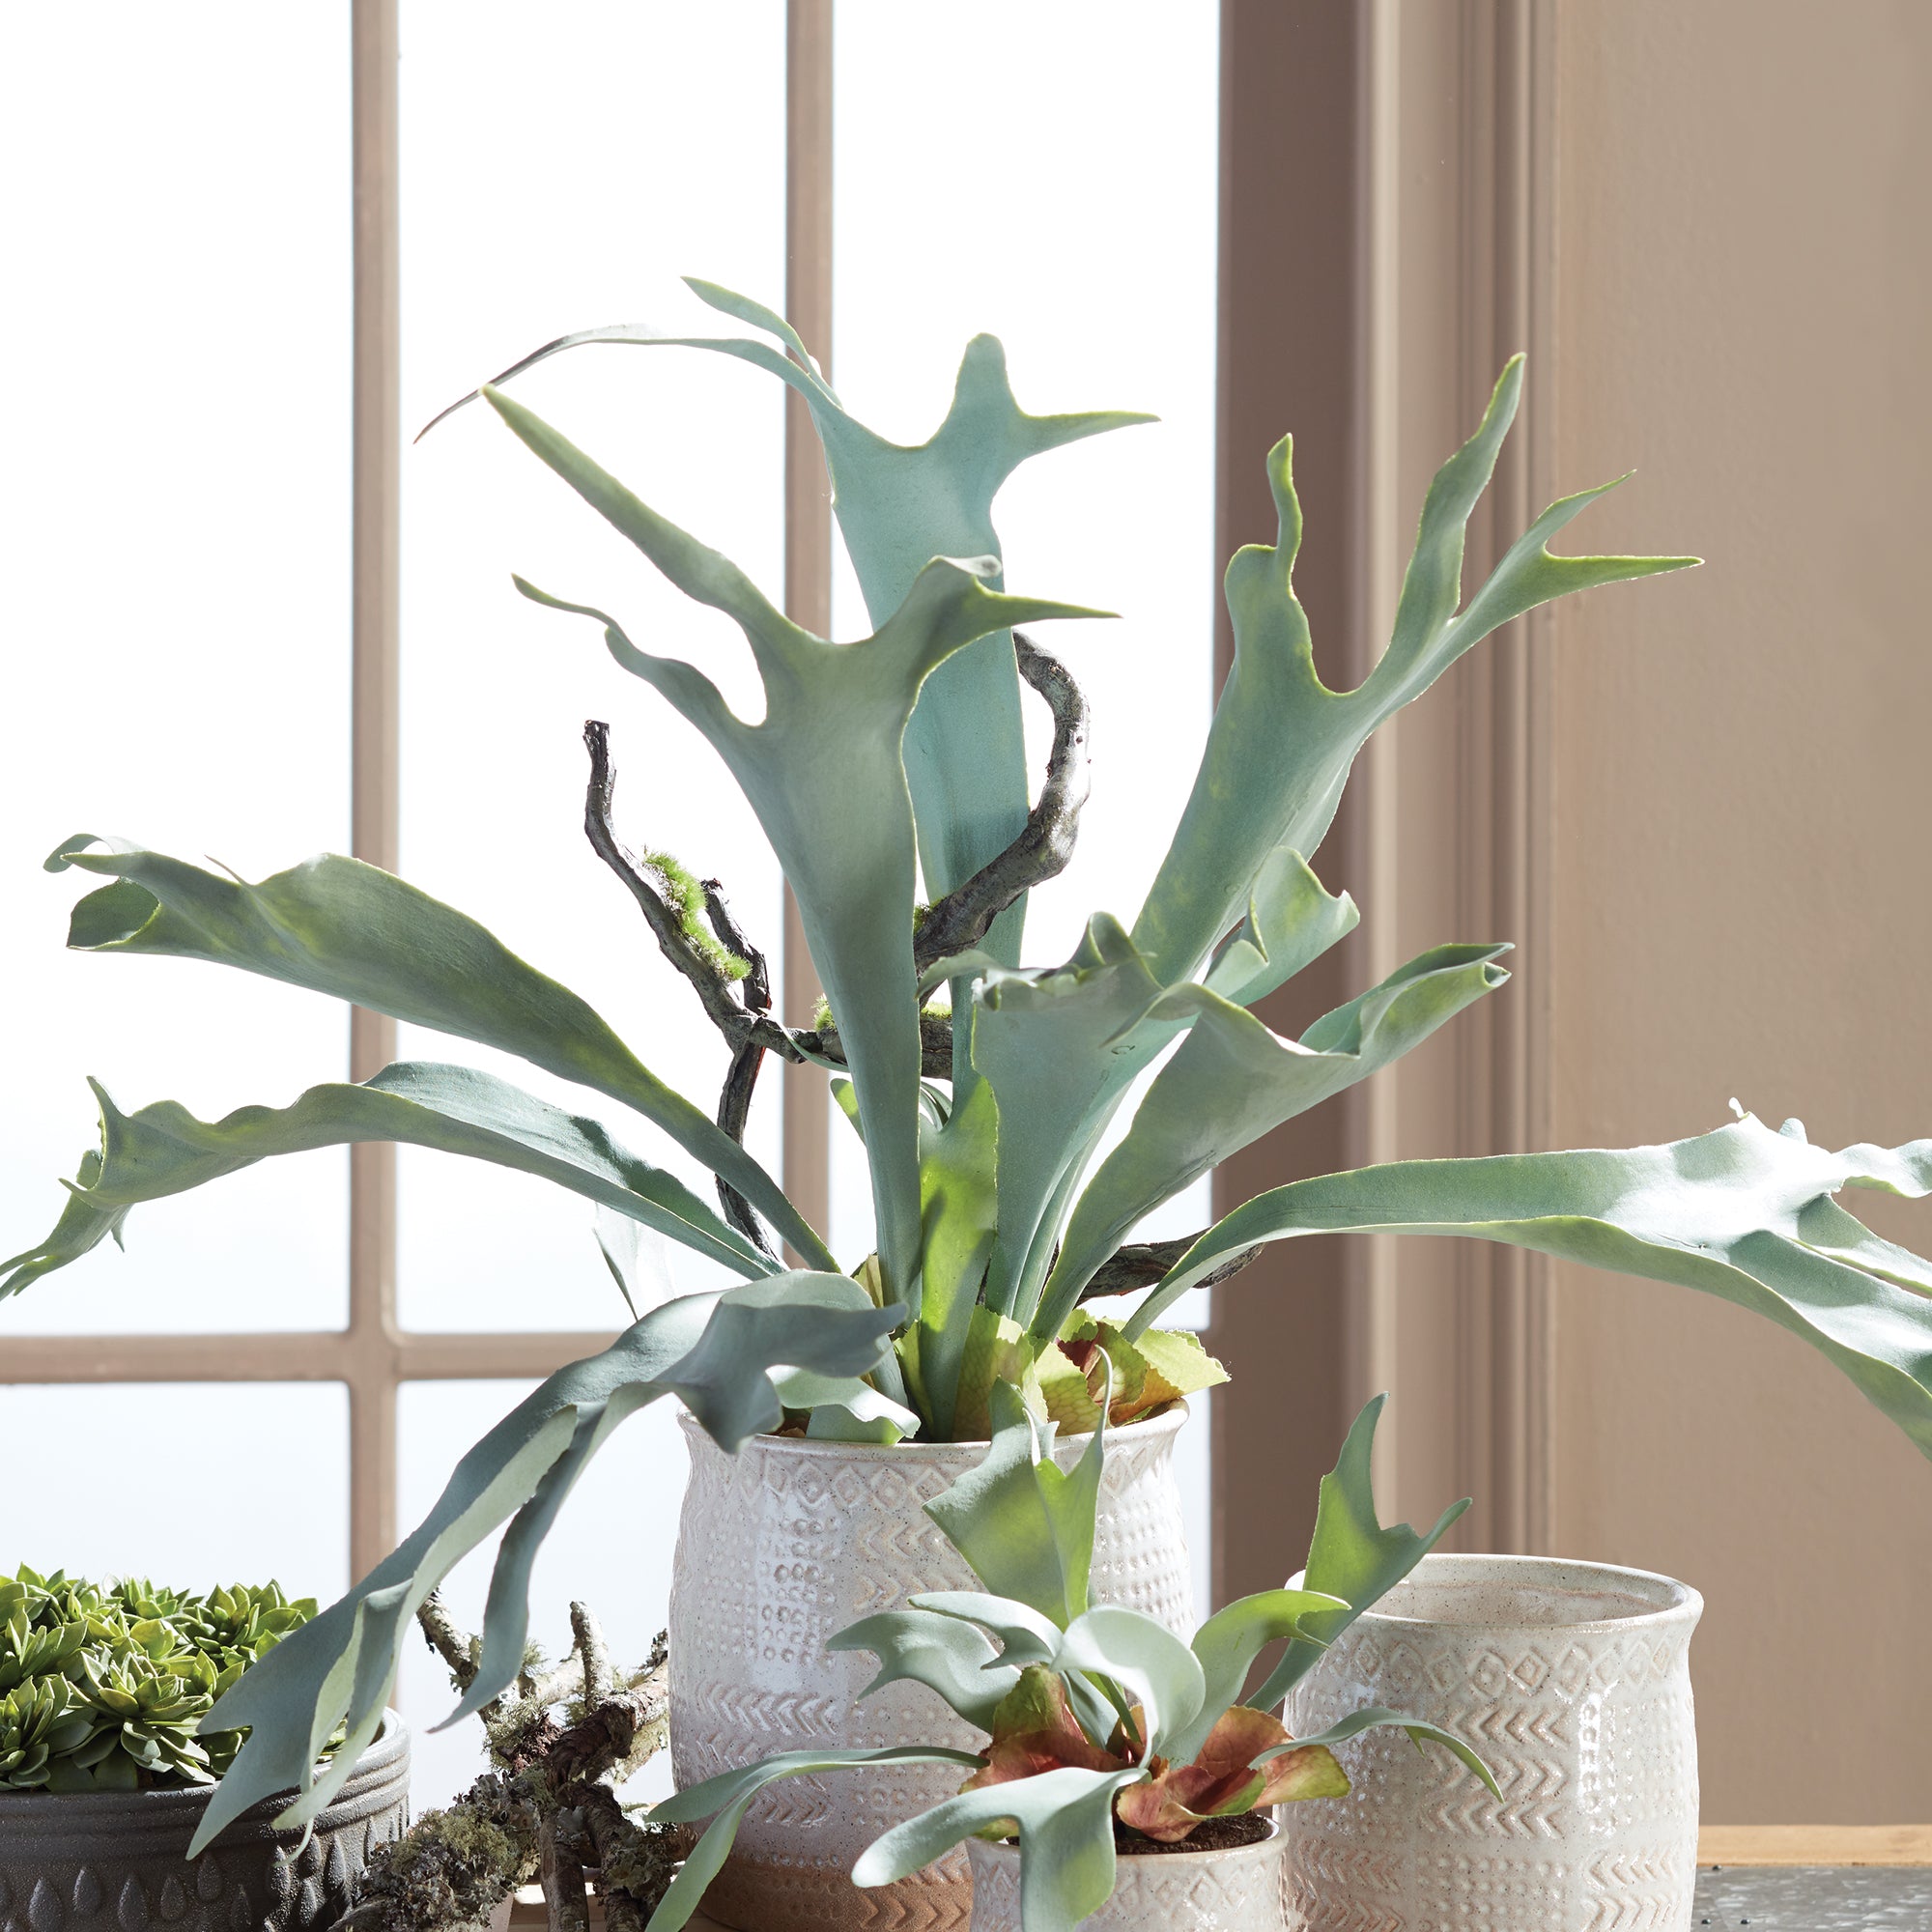 The Staghorn Fern is full of high drama, and sure to be a conversation starter. Typically found in wall configurations, we bring this uniquely free-standing beauty to the table. Amethyst Home provides interior design, new construction, custom furniture, and area rugs in the Los Angeles metro area.